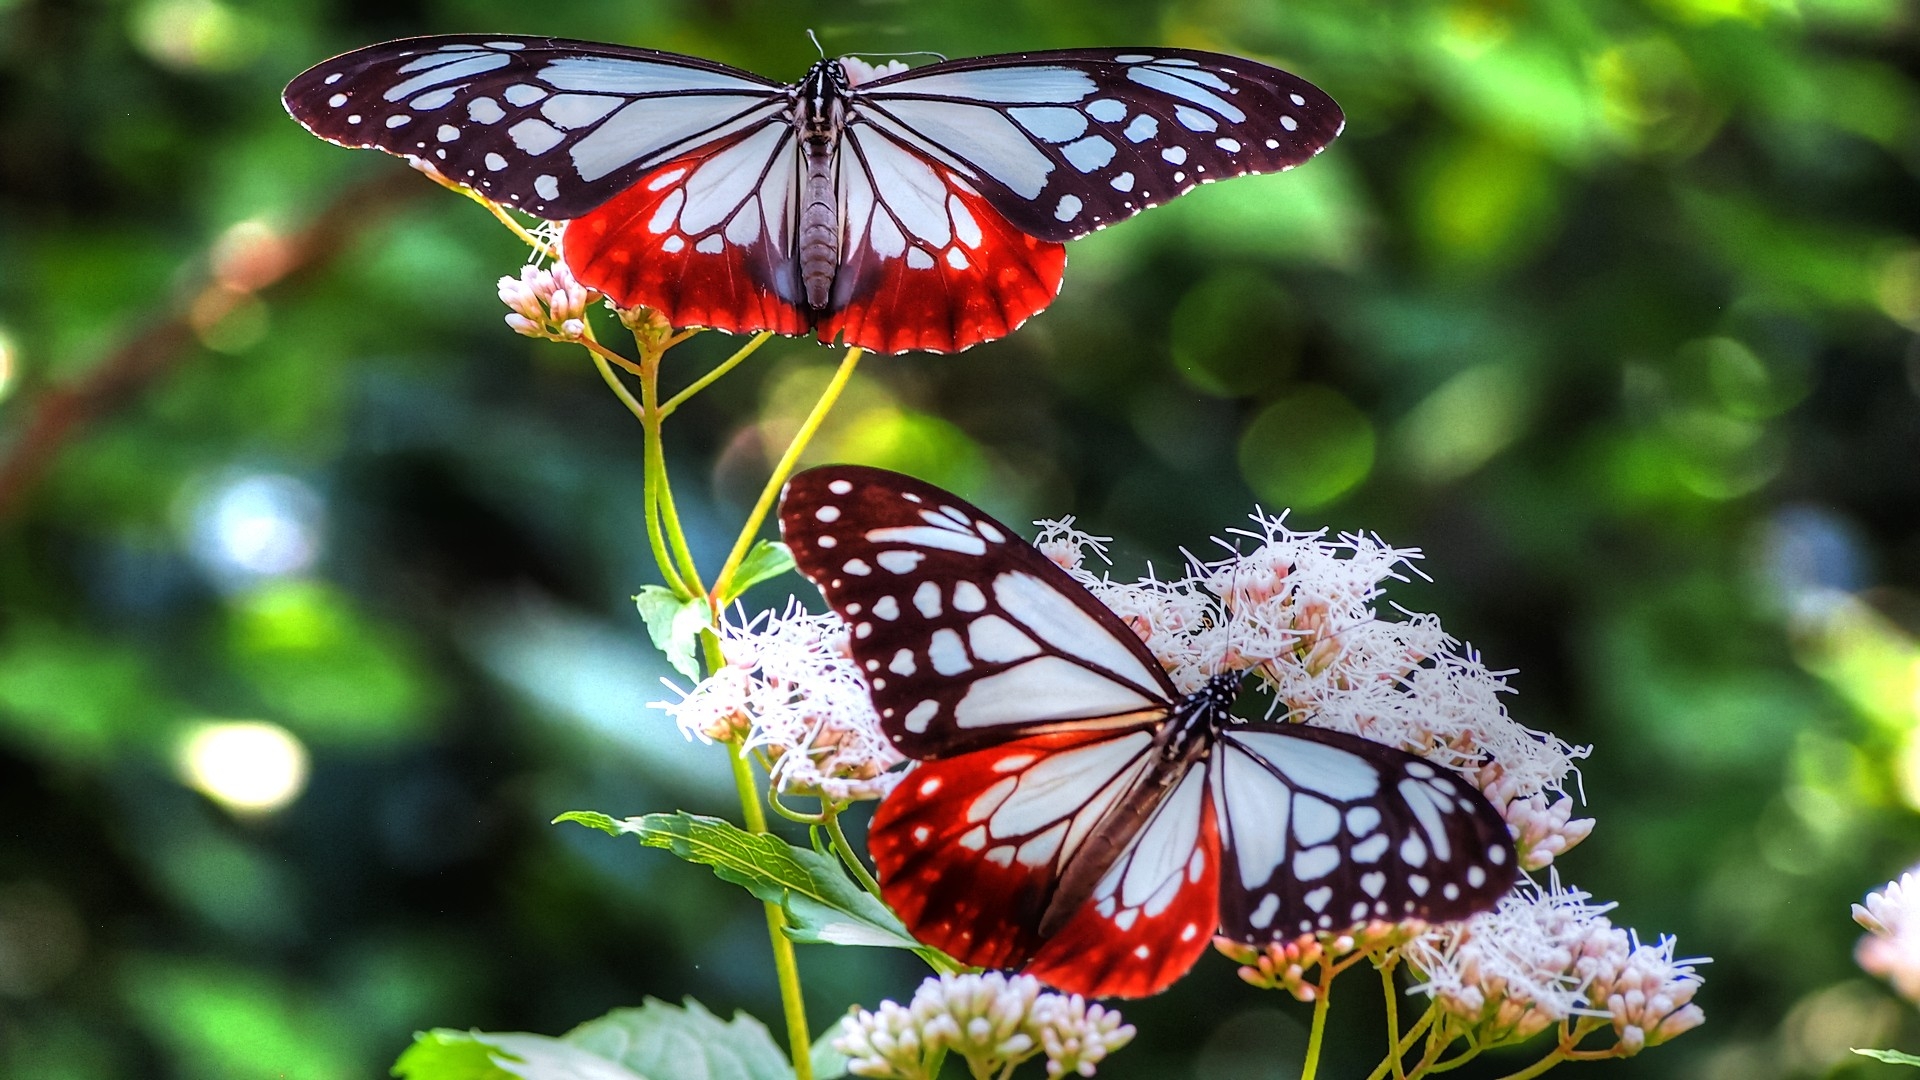 Download Wallpaper 1920x1080 butterfly, patterns, lines, insect Full HD